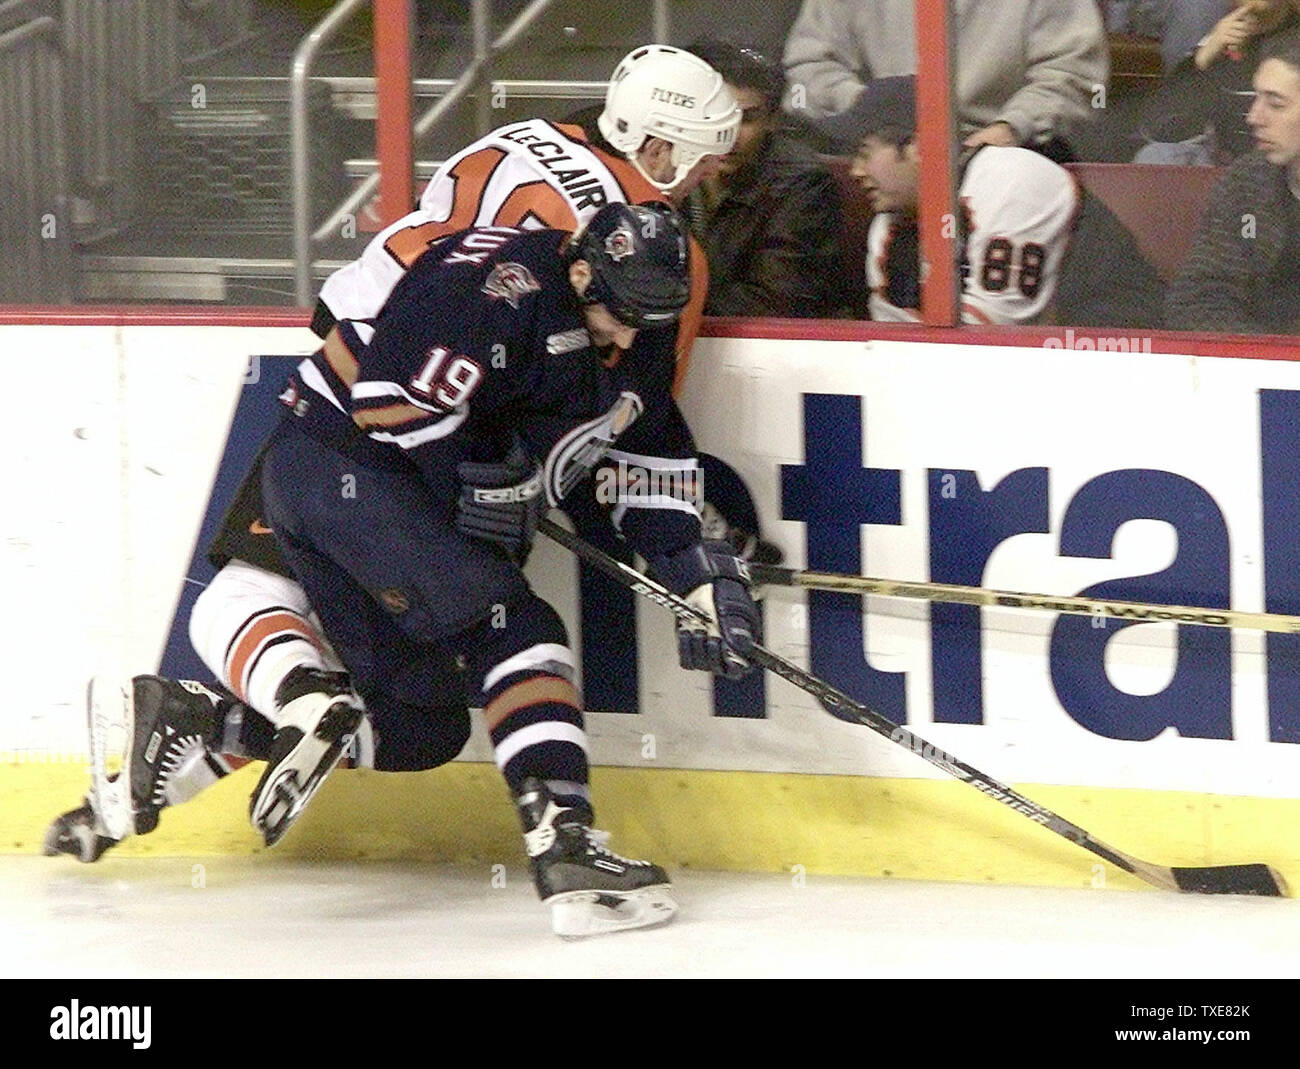 PHI2000011501 - 15 JANUARY 2000 - PHILADELPHIA, PENNSYLVANIA, USA: Flyers' John  LeClair (#10) goes against New Jersey's goalie Martin Brodeur (#30) in a  goal attempt during third period Philadelphia Flyers-New Jersey Devils